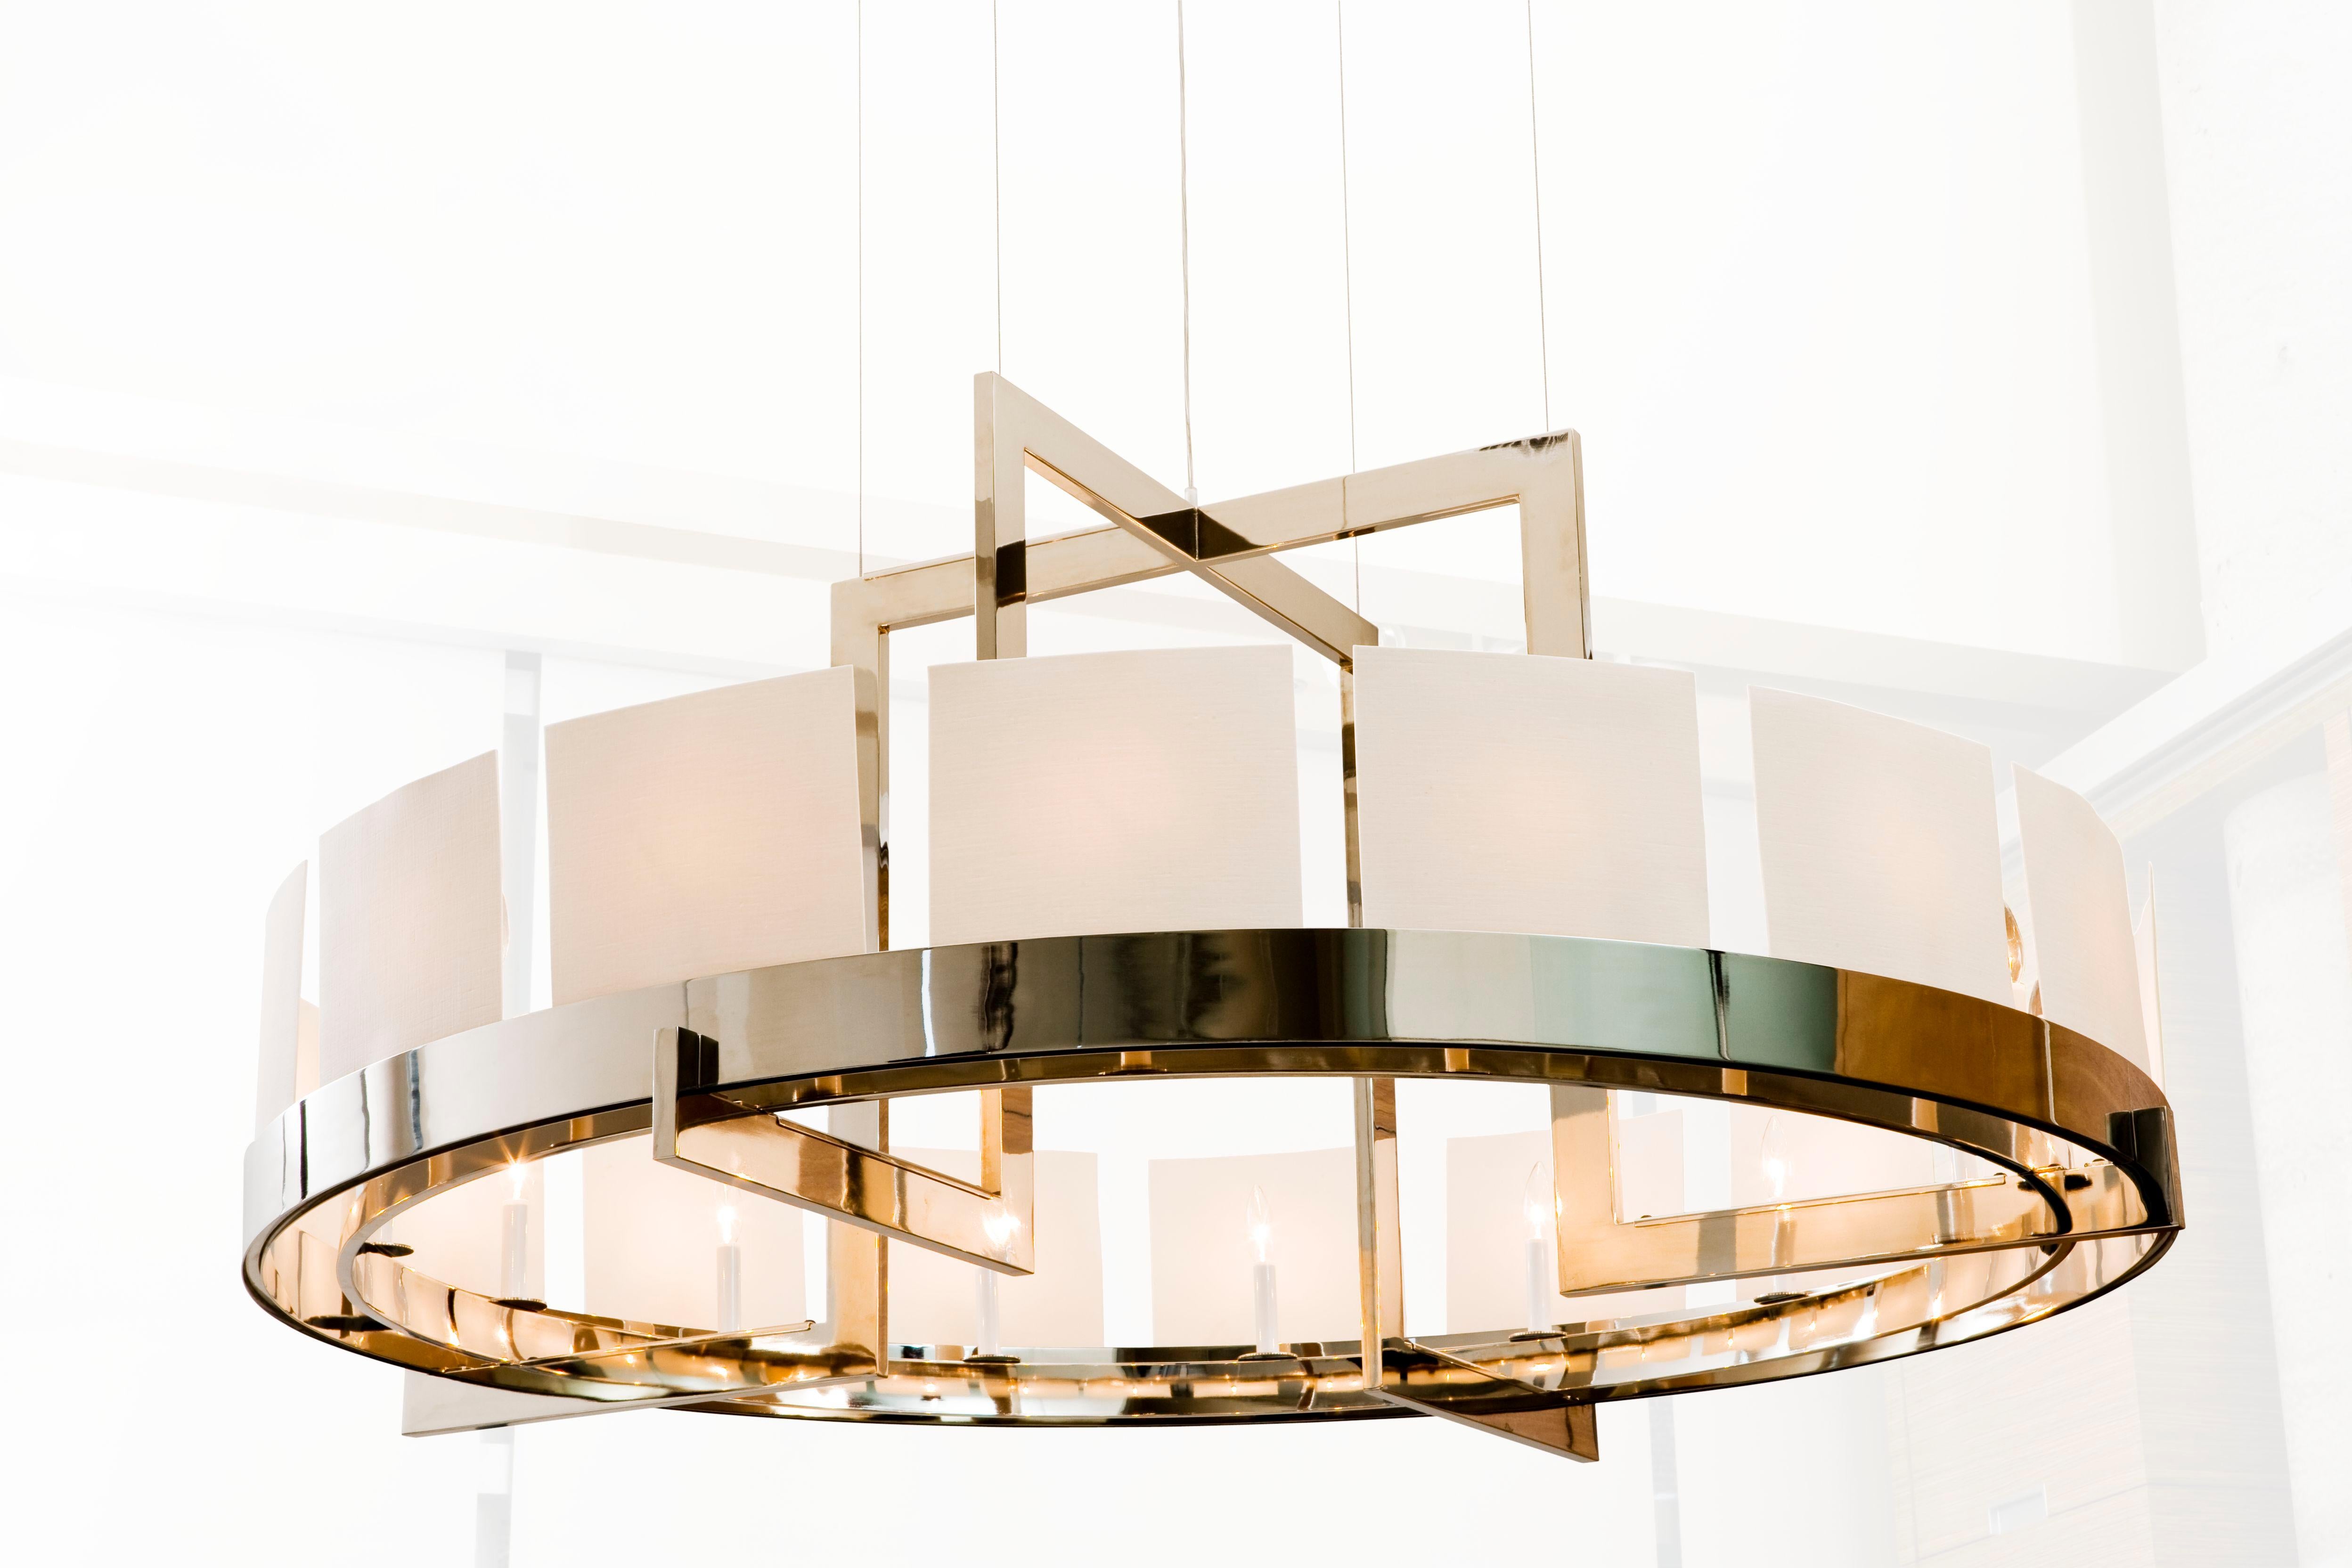 Chandelier with metal frame and 16 handmade translucent porcelain diffusers. Ceiling armature/canopy with four stainless steel cable suspensions, height adjustable. Inc/cand/max 40W. ULC equivalent / CSA approved. 120v 40w. Note: All shades are